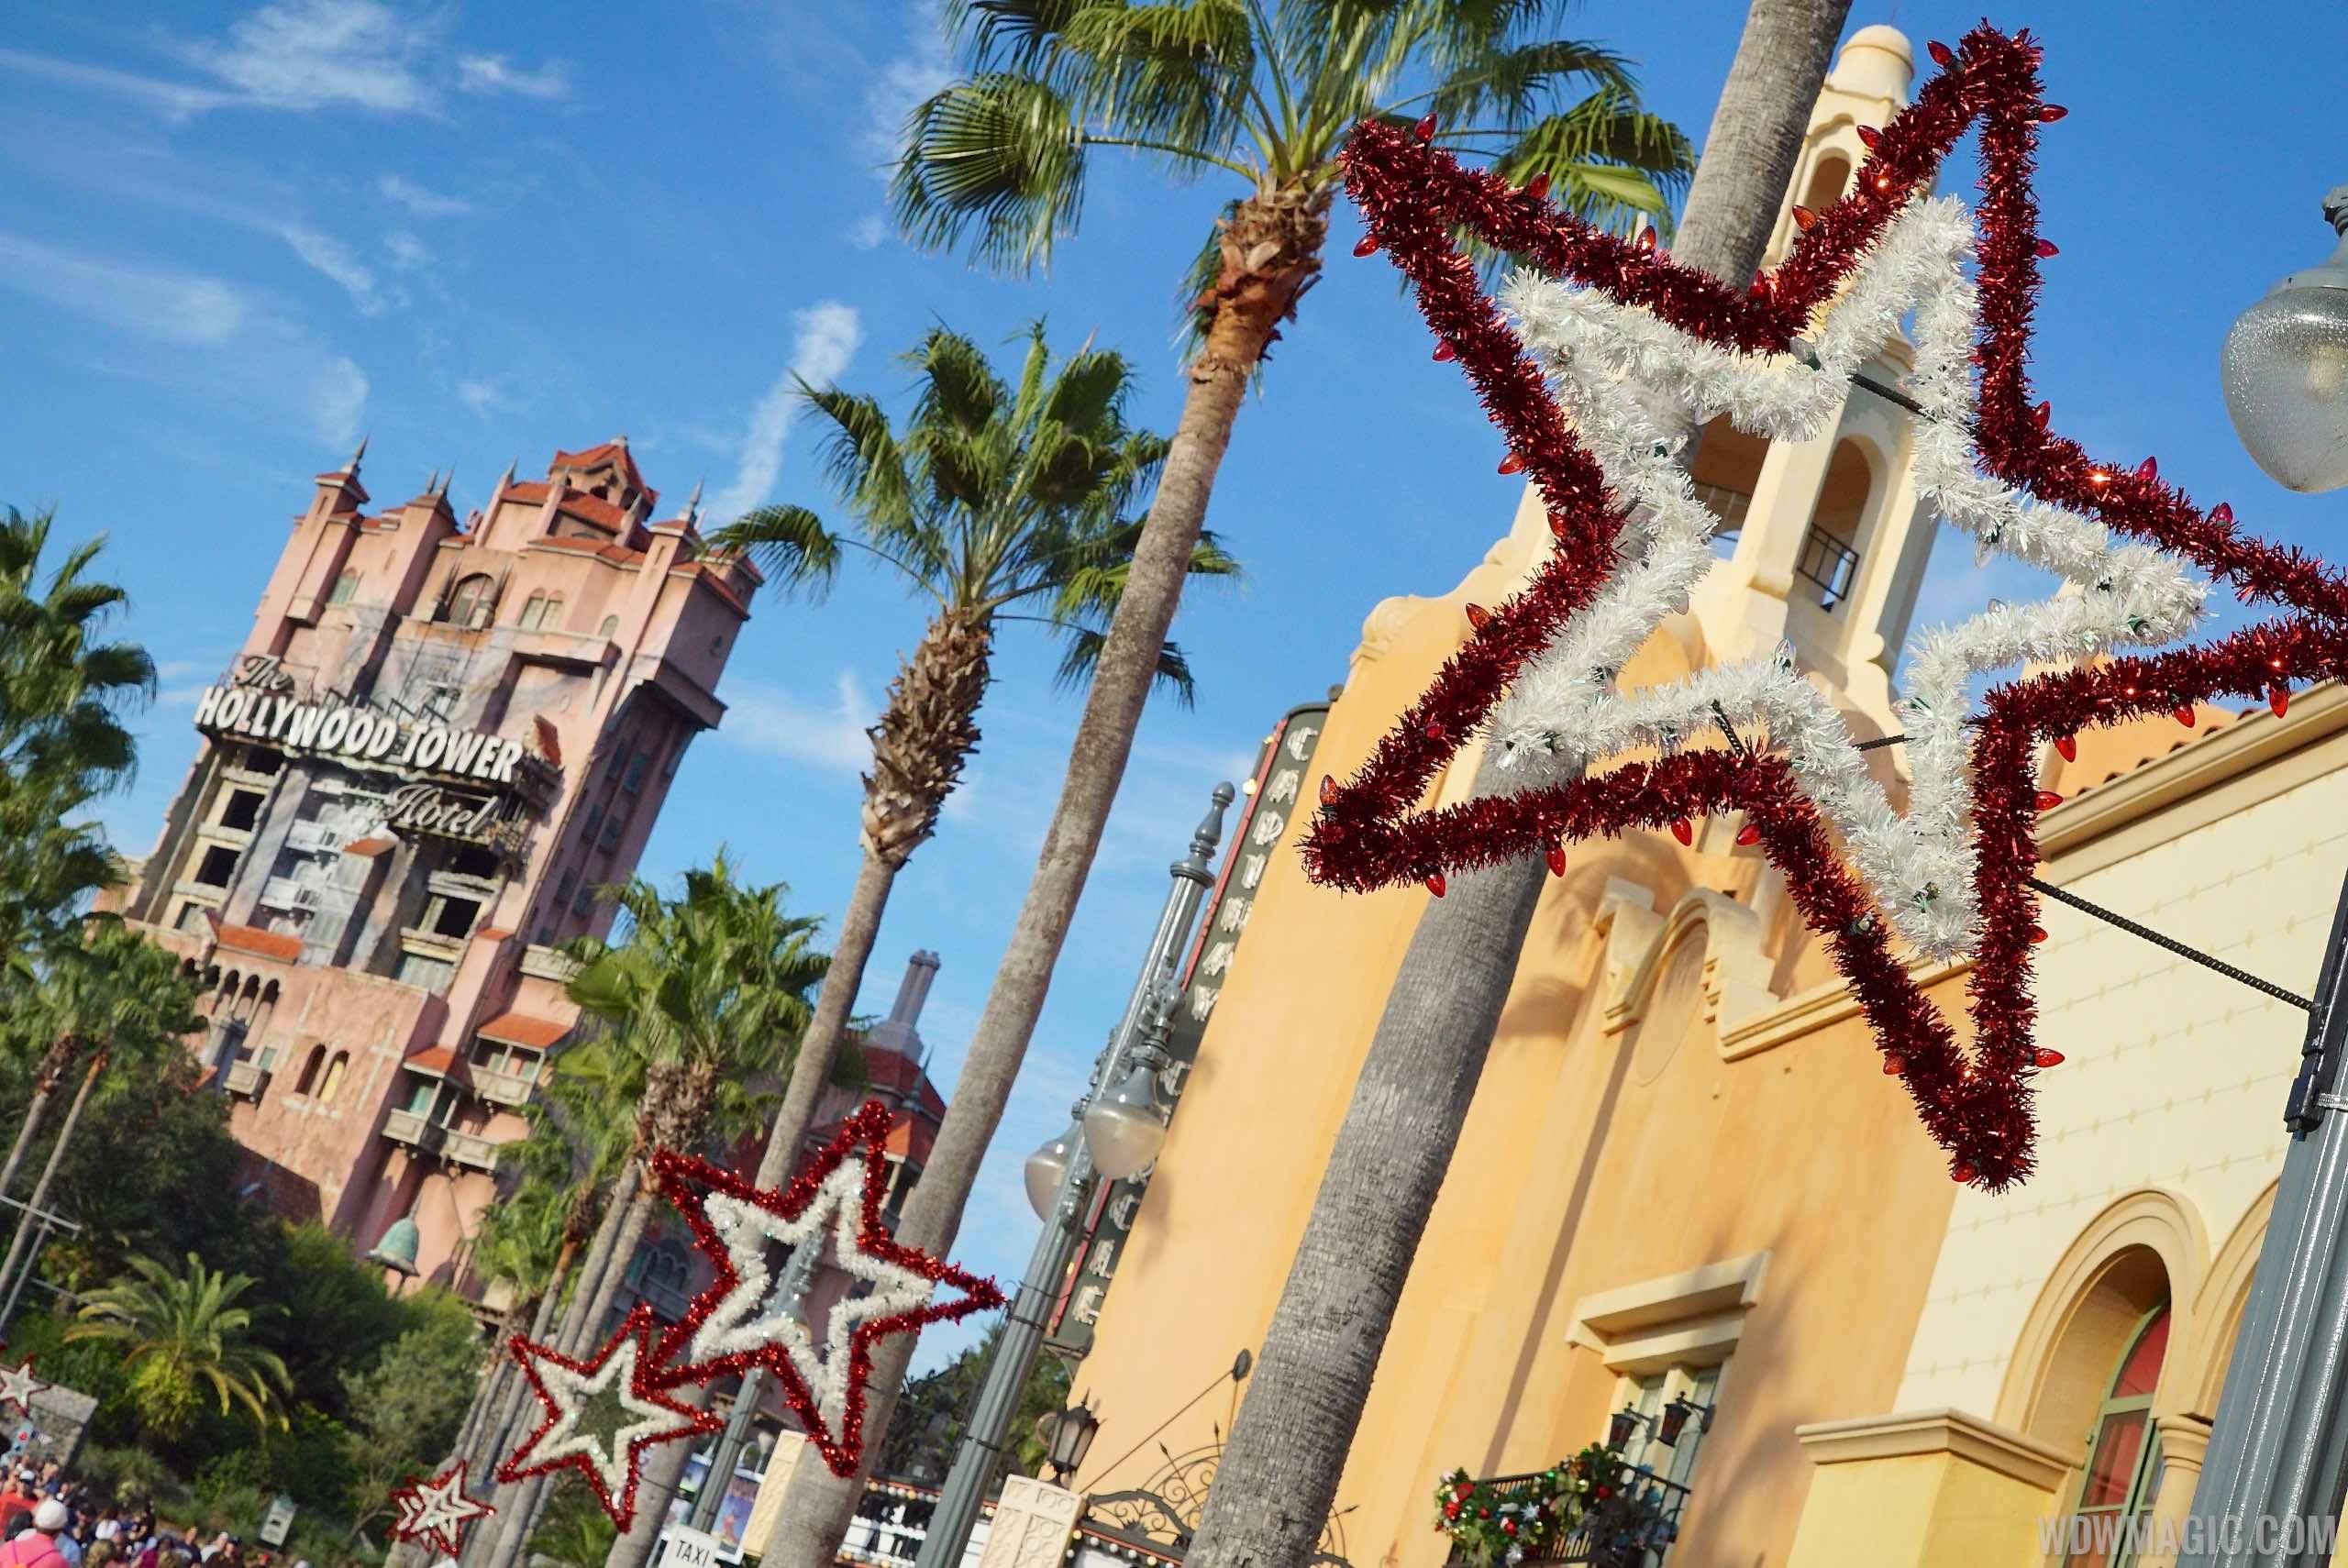 Disney's Hollywood Studios is extremely busy today despite the holiday season winning down